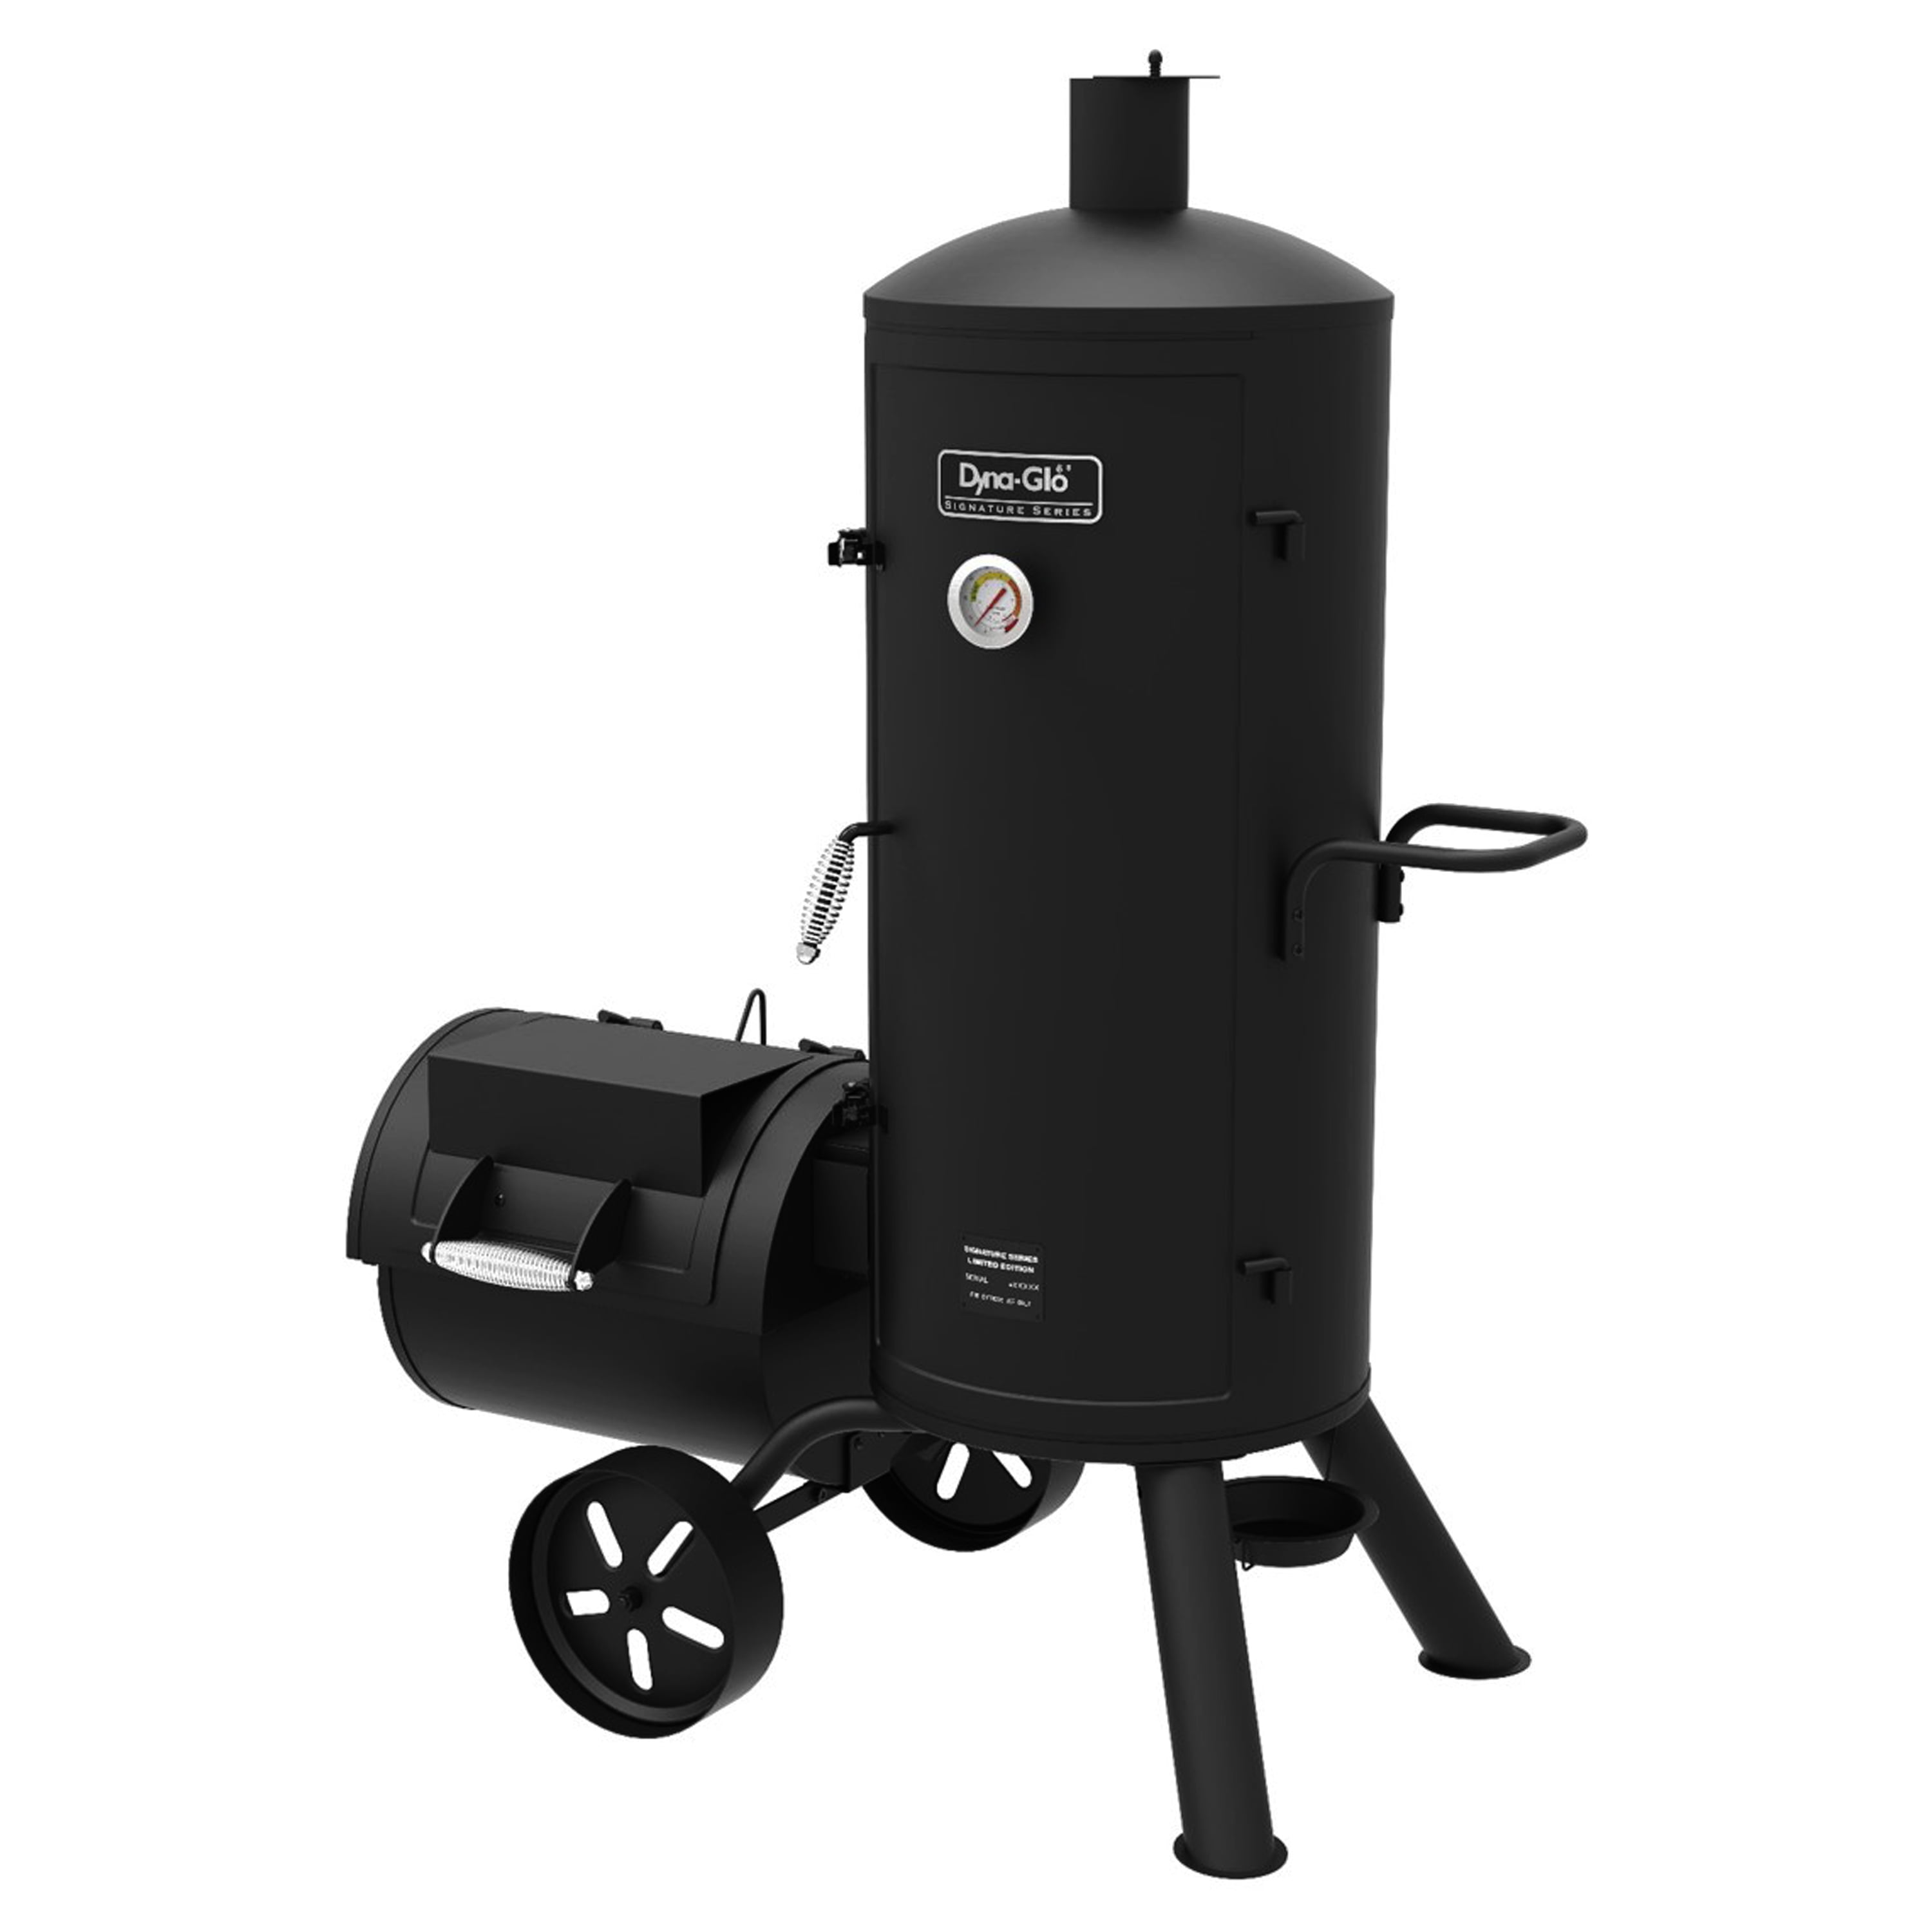 Dyna-Glo Gas Vertical Smoker Review